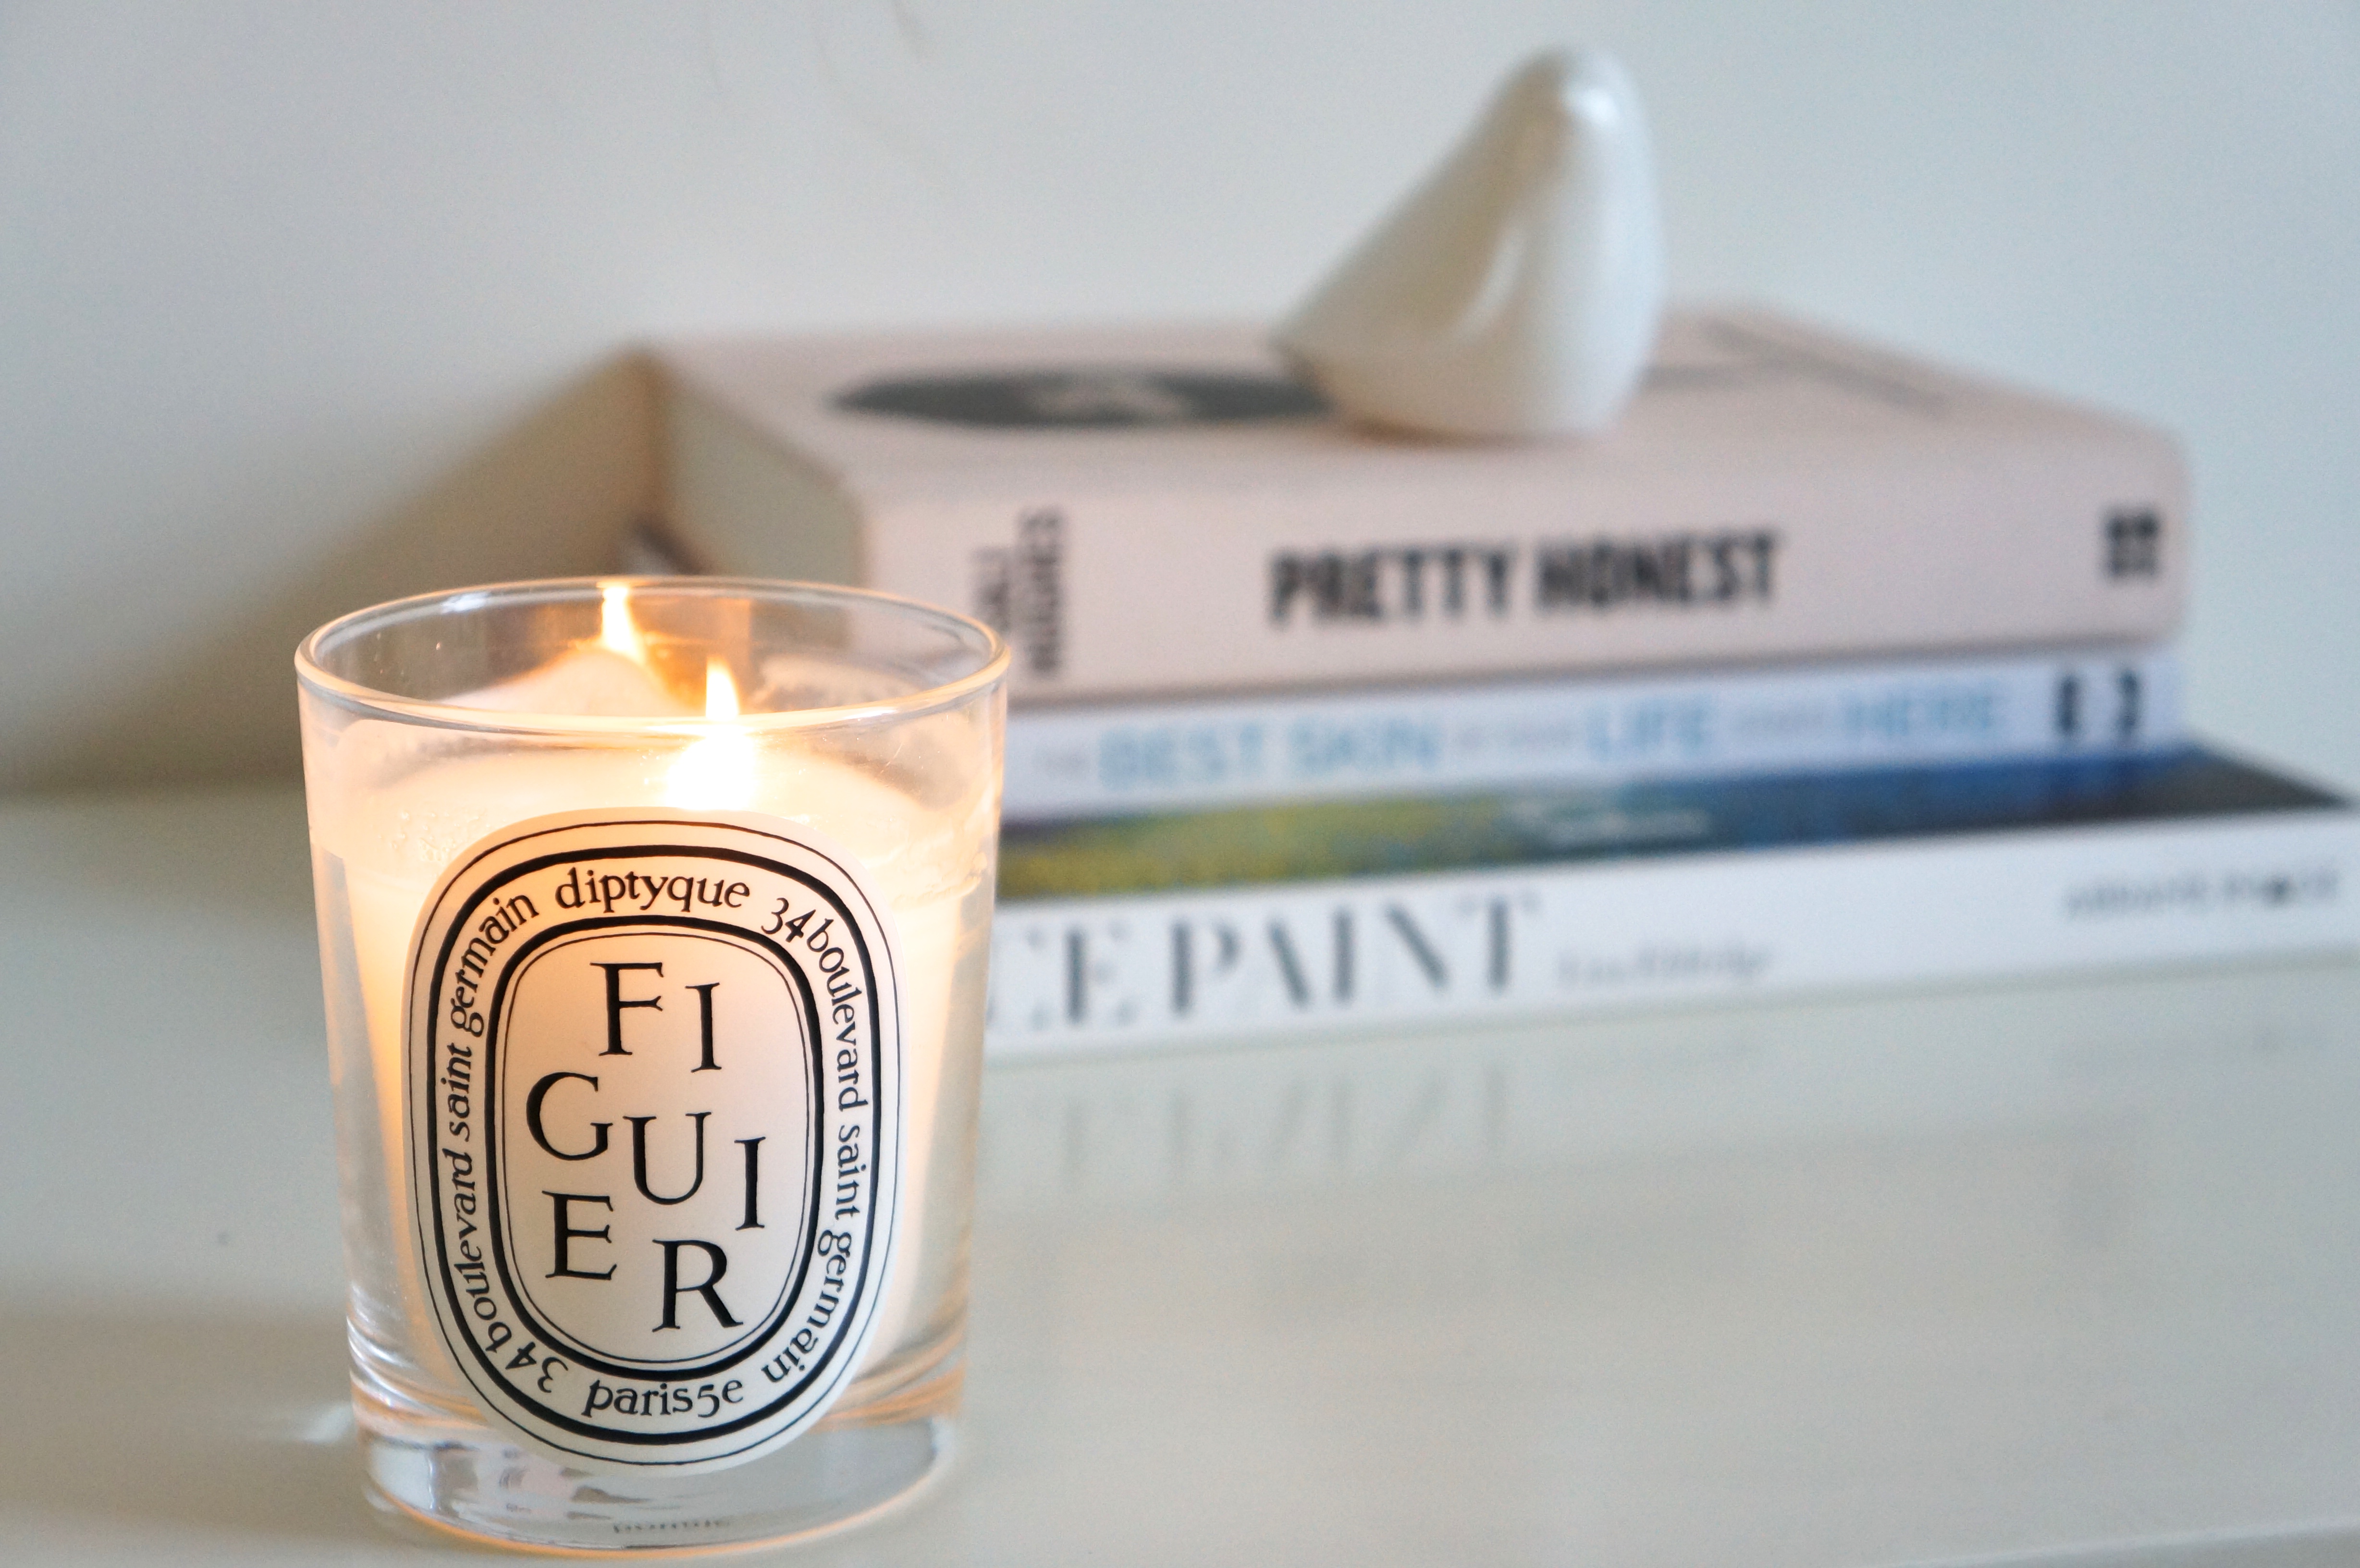 Figuier by Diptyque/ Pic by 1FDLE.